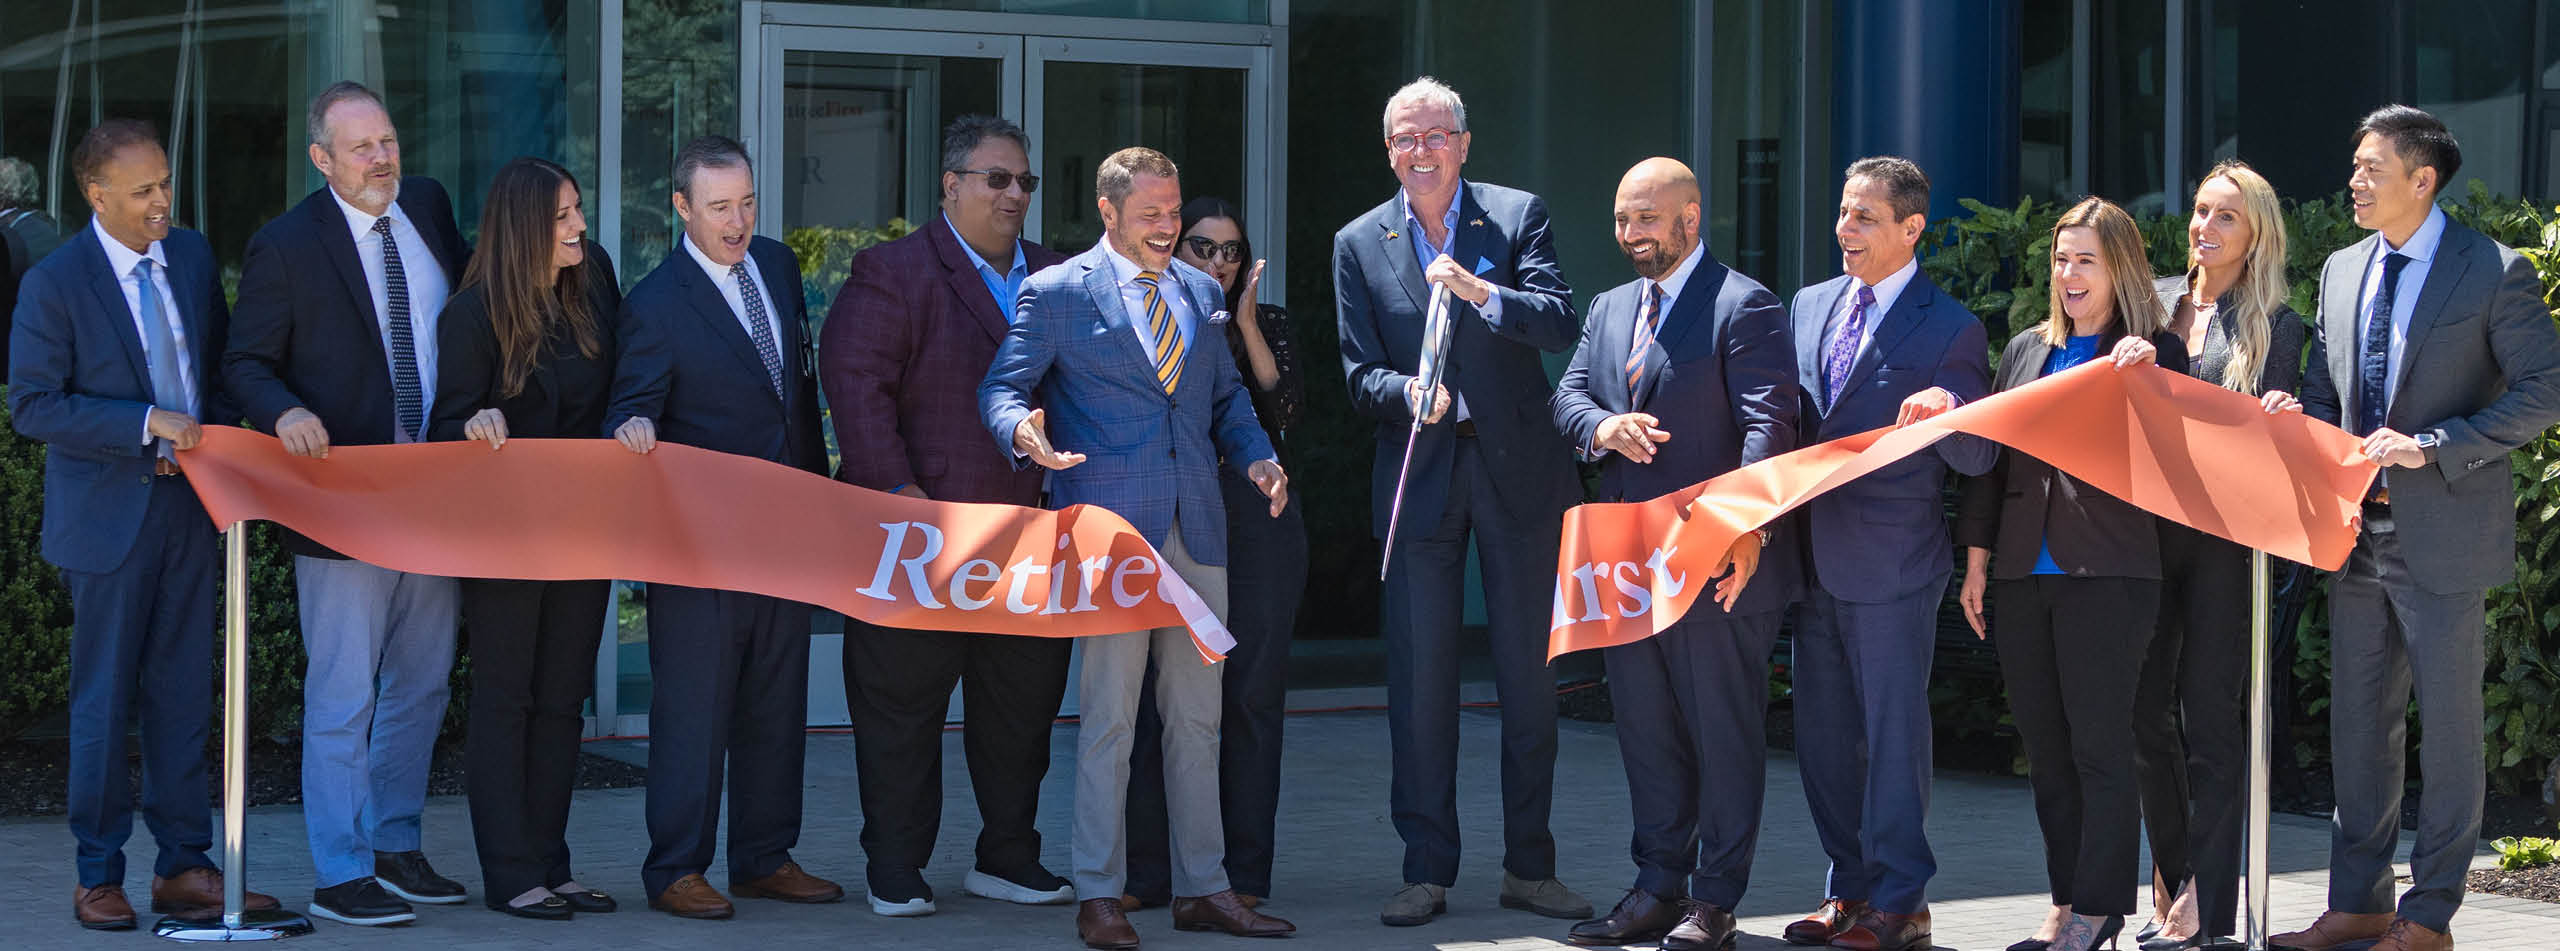 New Jersey Governor Phil Murphy and the RetireeFirst team cutting a ribbon to open a new building